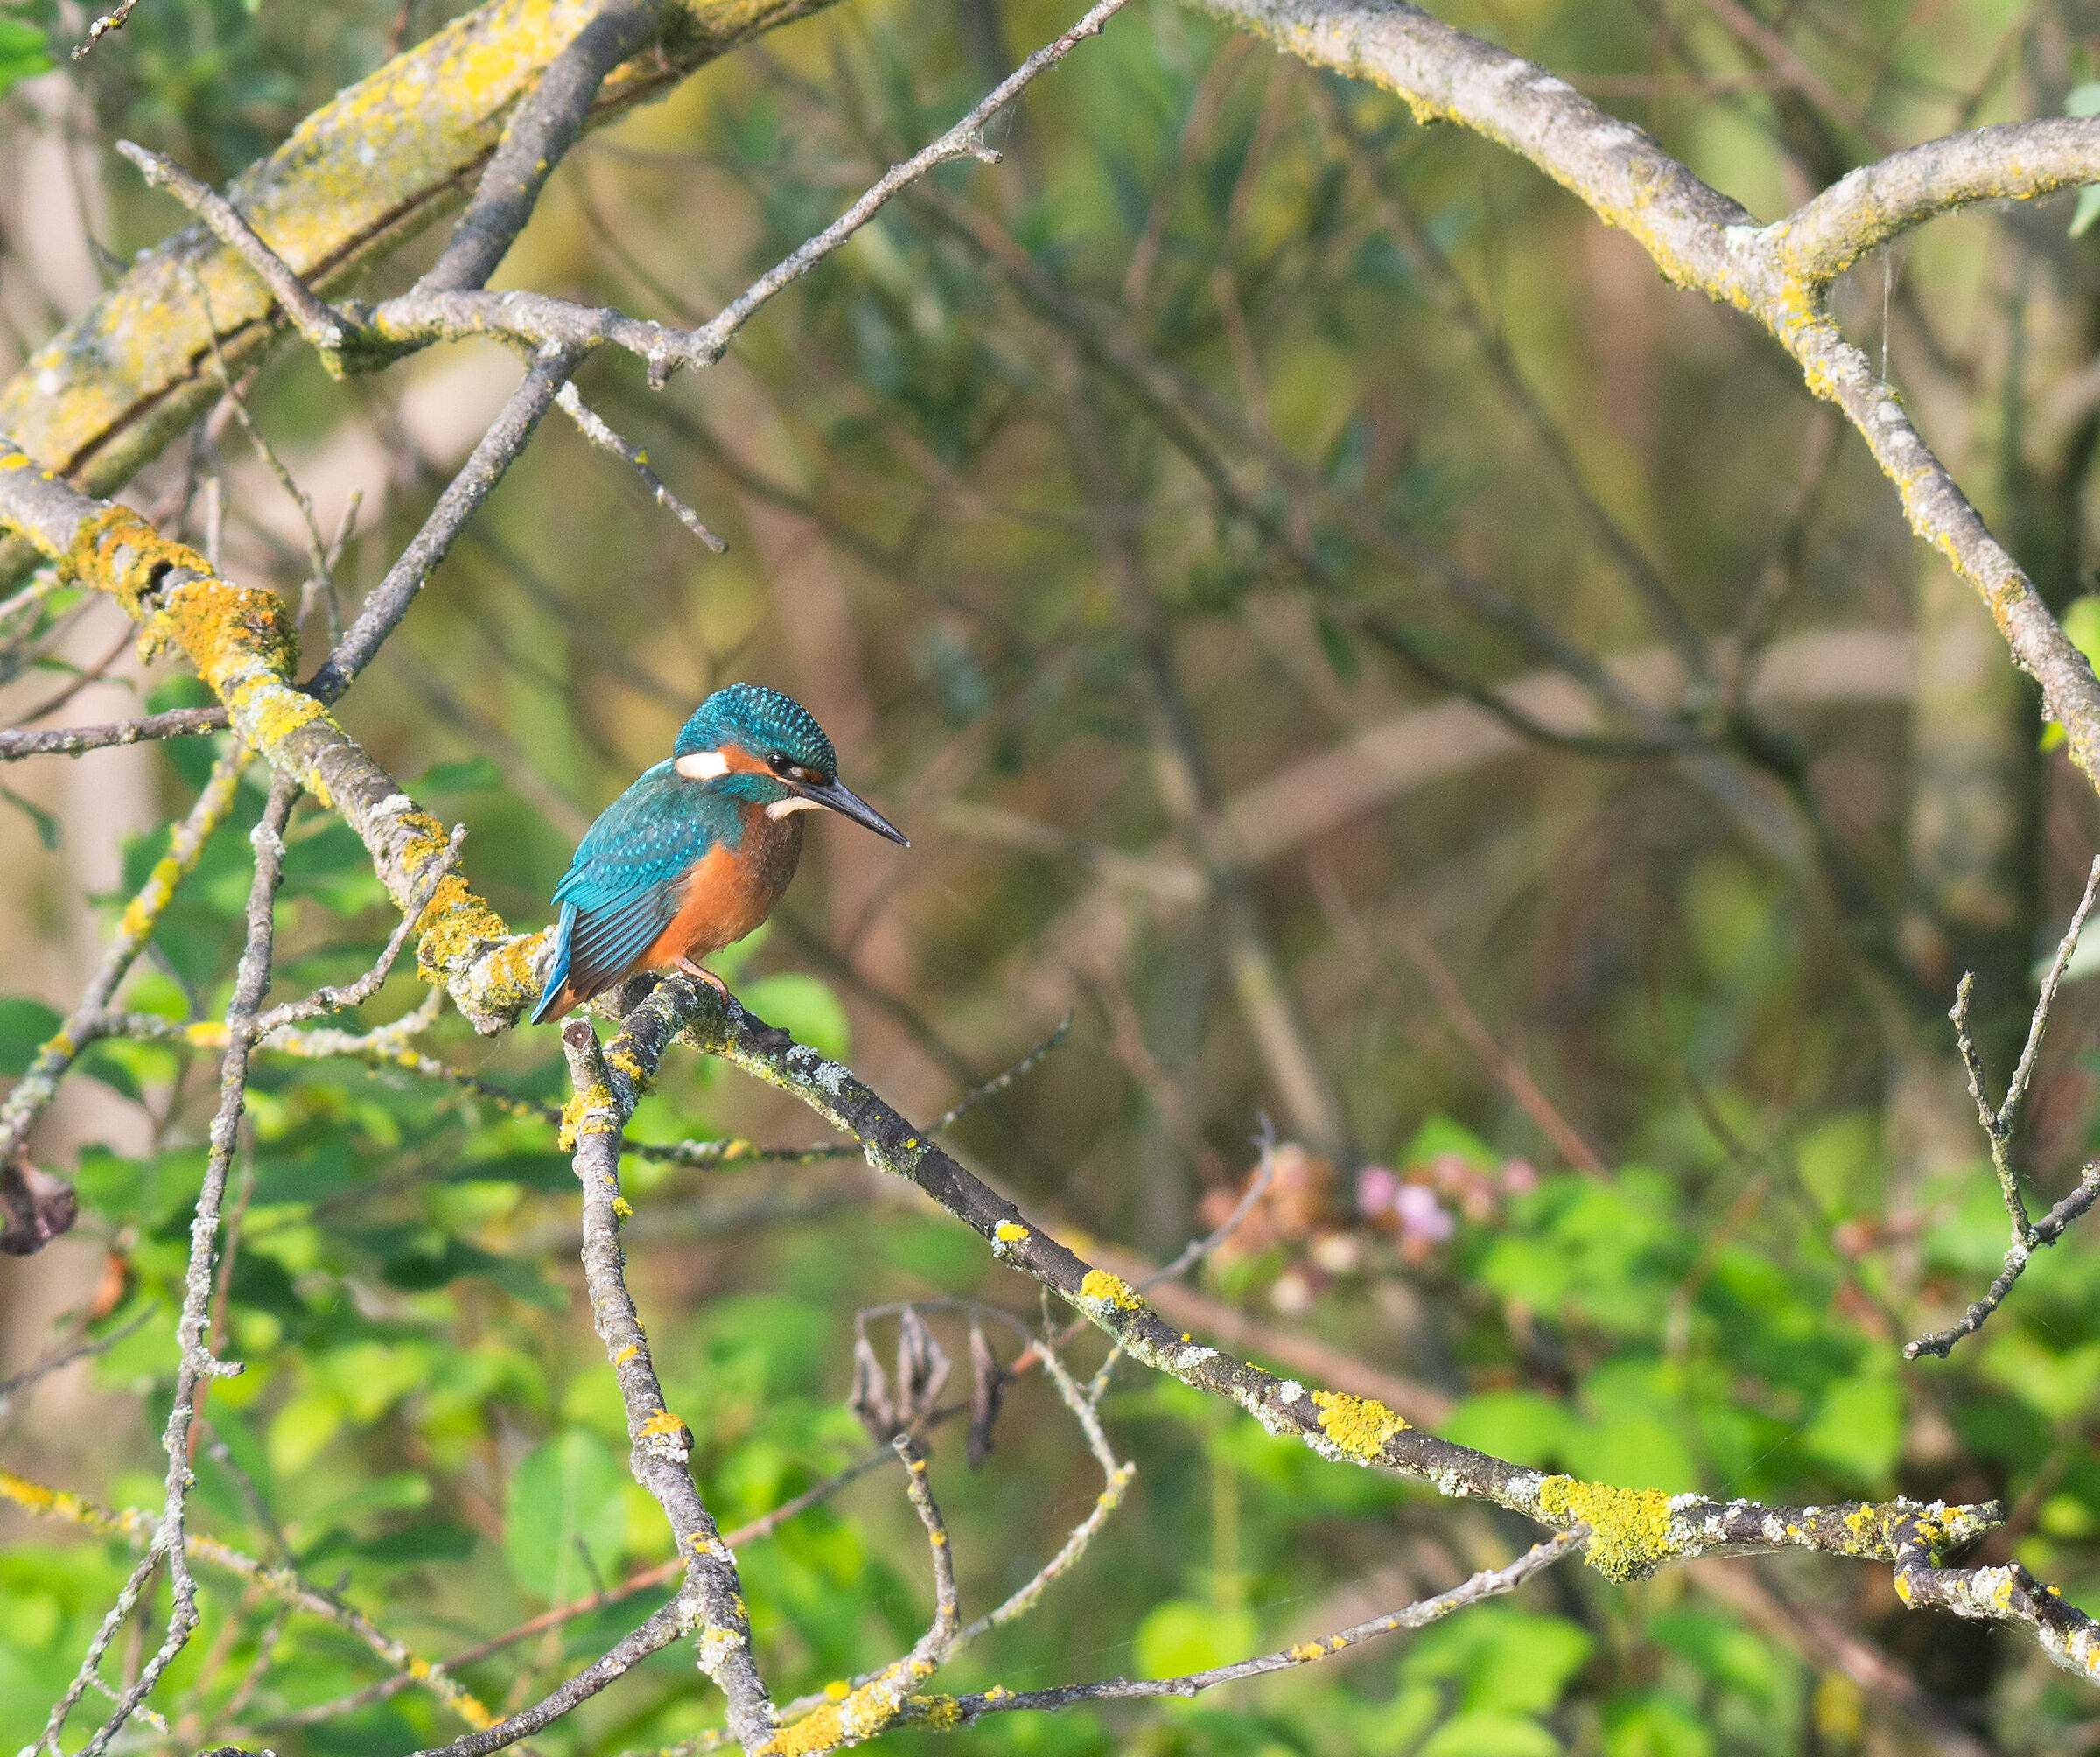 The magic of the telescope and the Kingfisher...